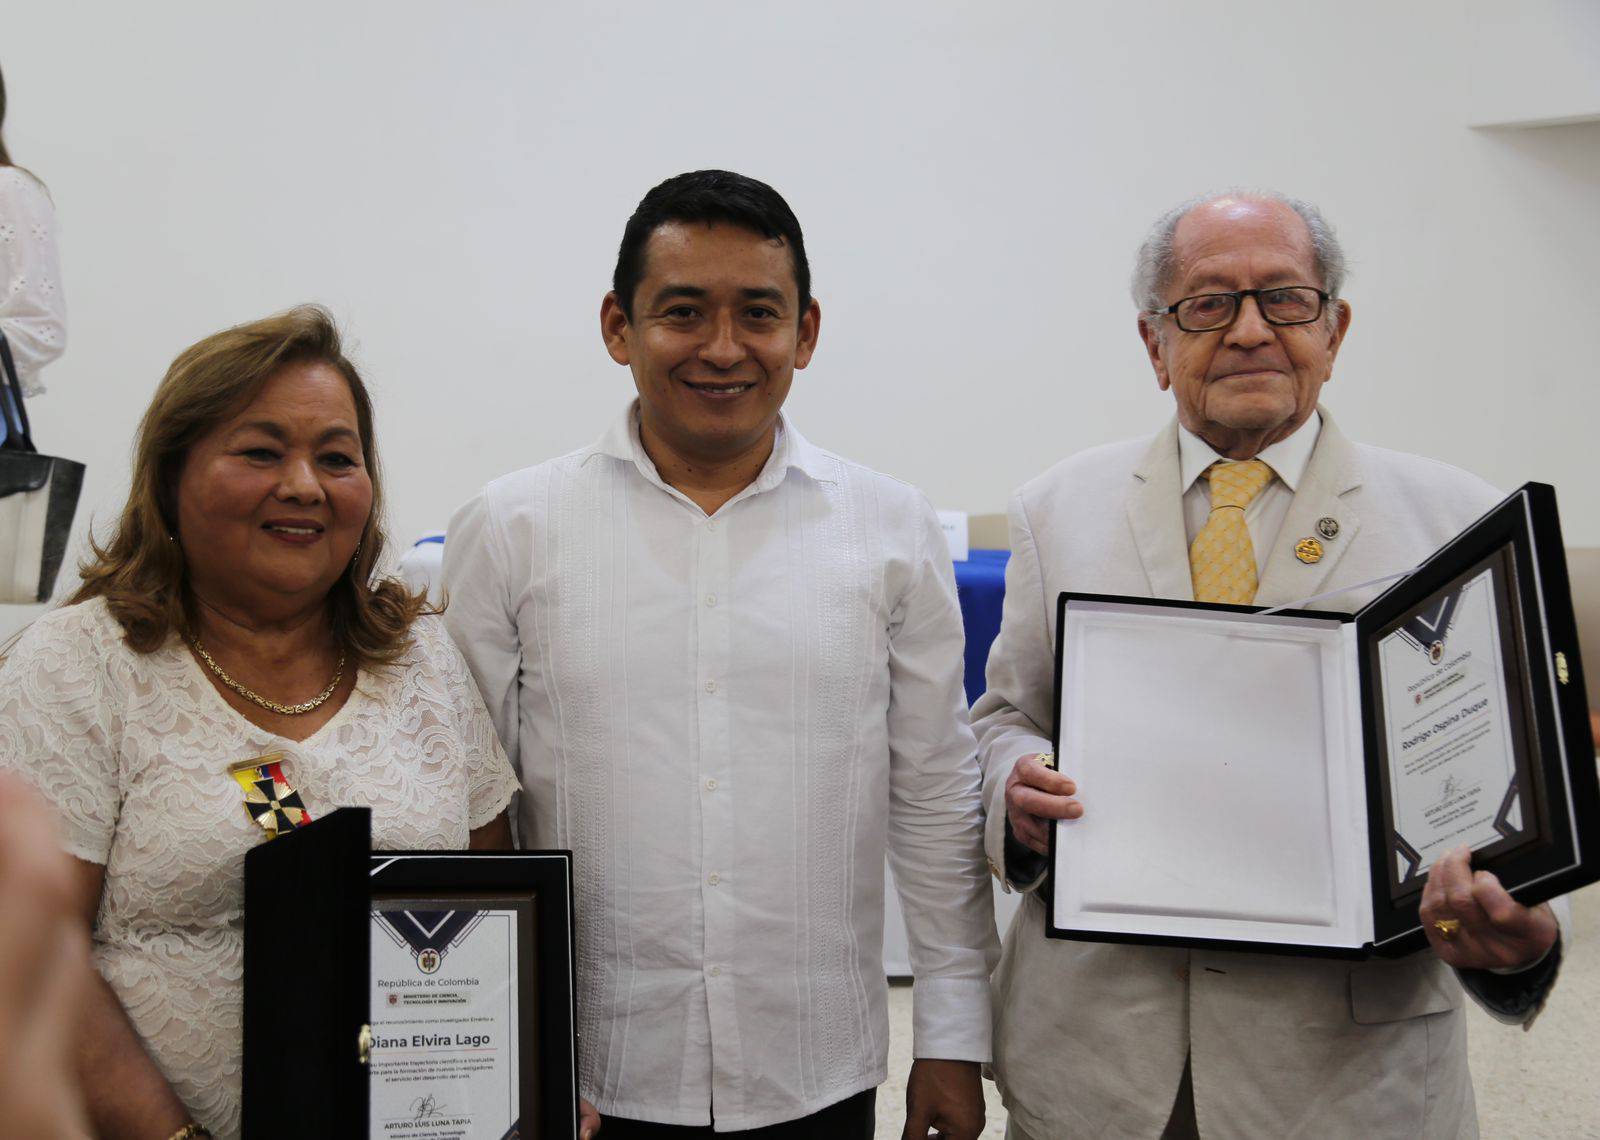 The Ministry of Science recognizes the work of scientists in Bolívar